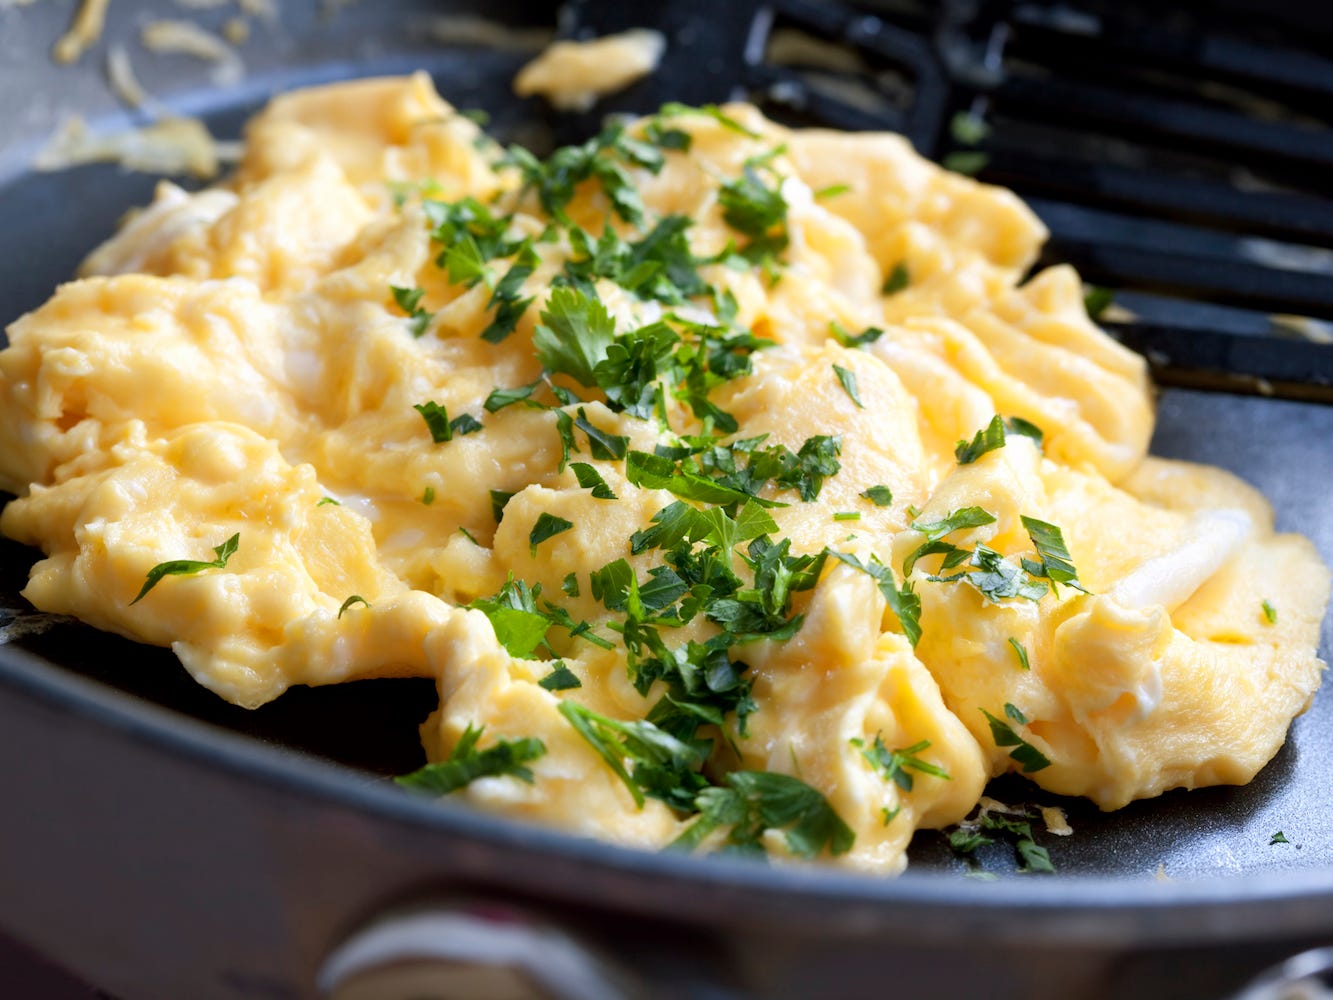 <p>Scrambled eggs are a ubiquitous brunch food, but getting them just the way you like is <a href="https://www.insider.com/how-to-eat-more-eggs-according-to-chefs-2020-1">probably easier at home than in a restaurant. </a></p><p>"Good scrambled eggs depend very much on personal preference," said Amiralian. "Leaving them in the hands of a cook on a busy day will probably leave you disappointed." </p>